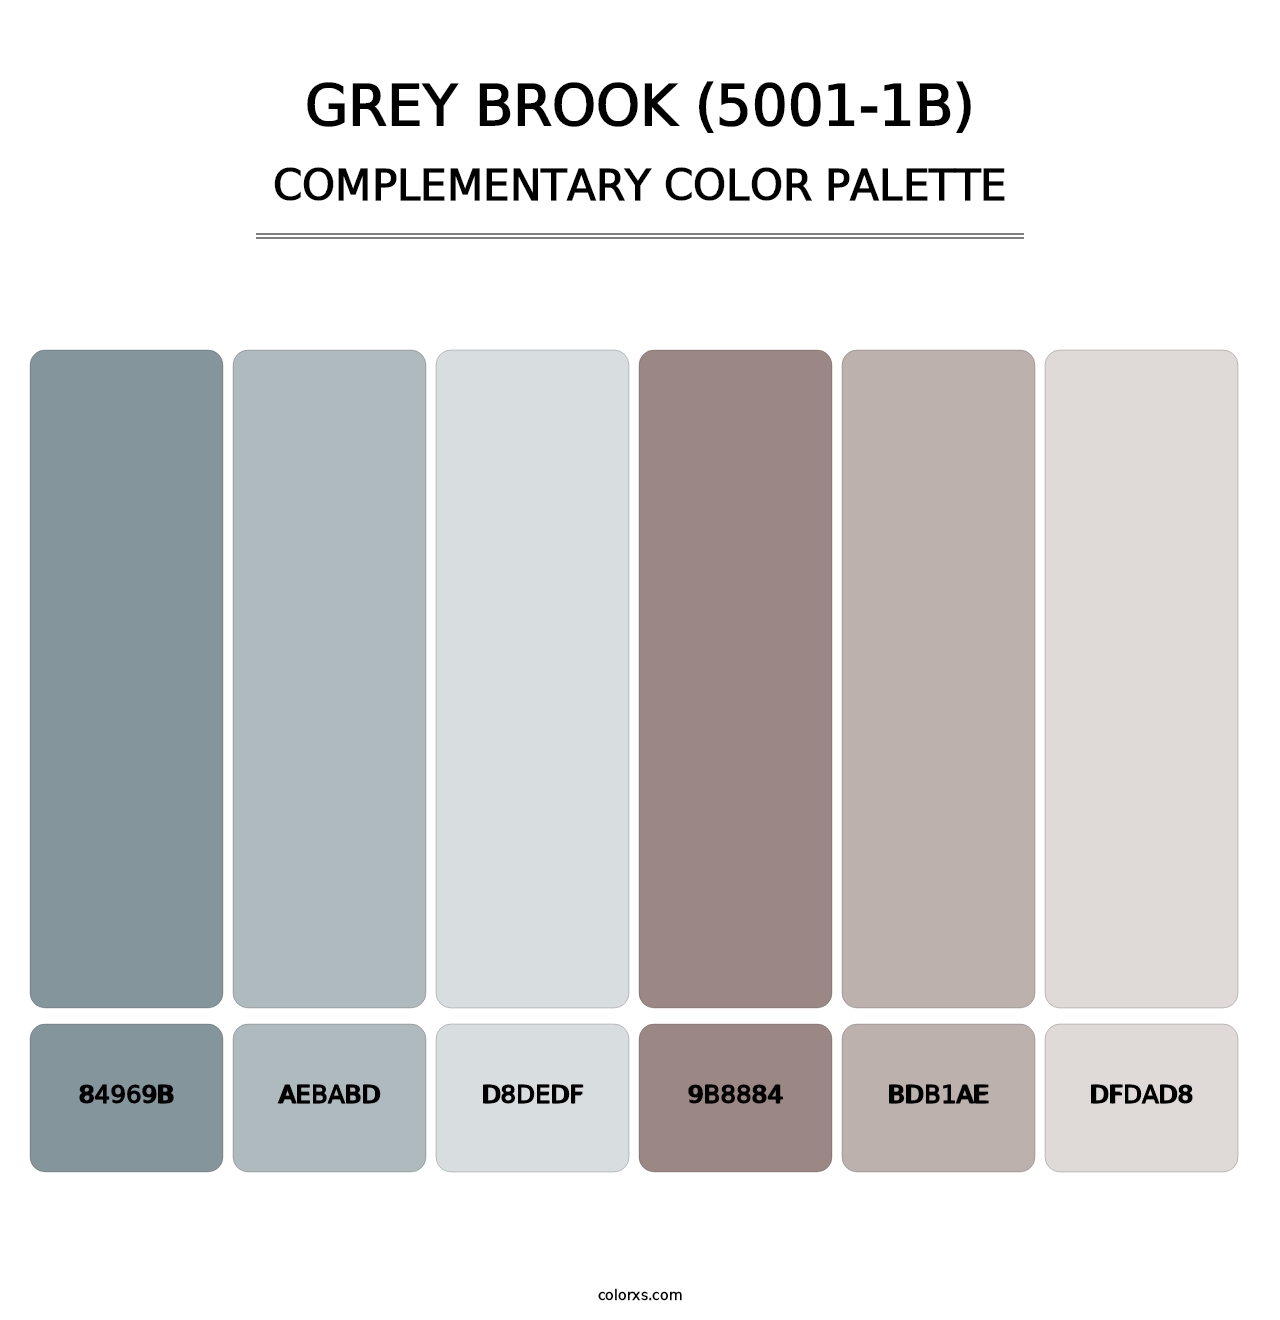 Grey Brook (5001-1B) - Complementary Color Palette